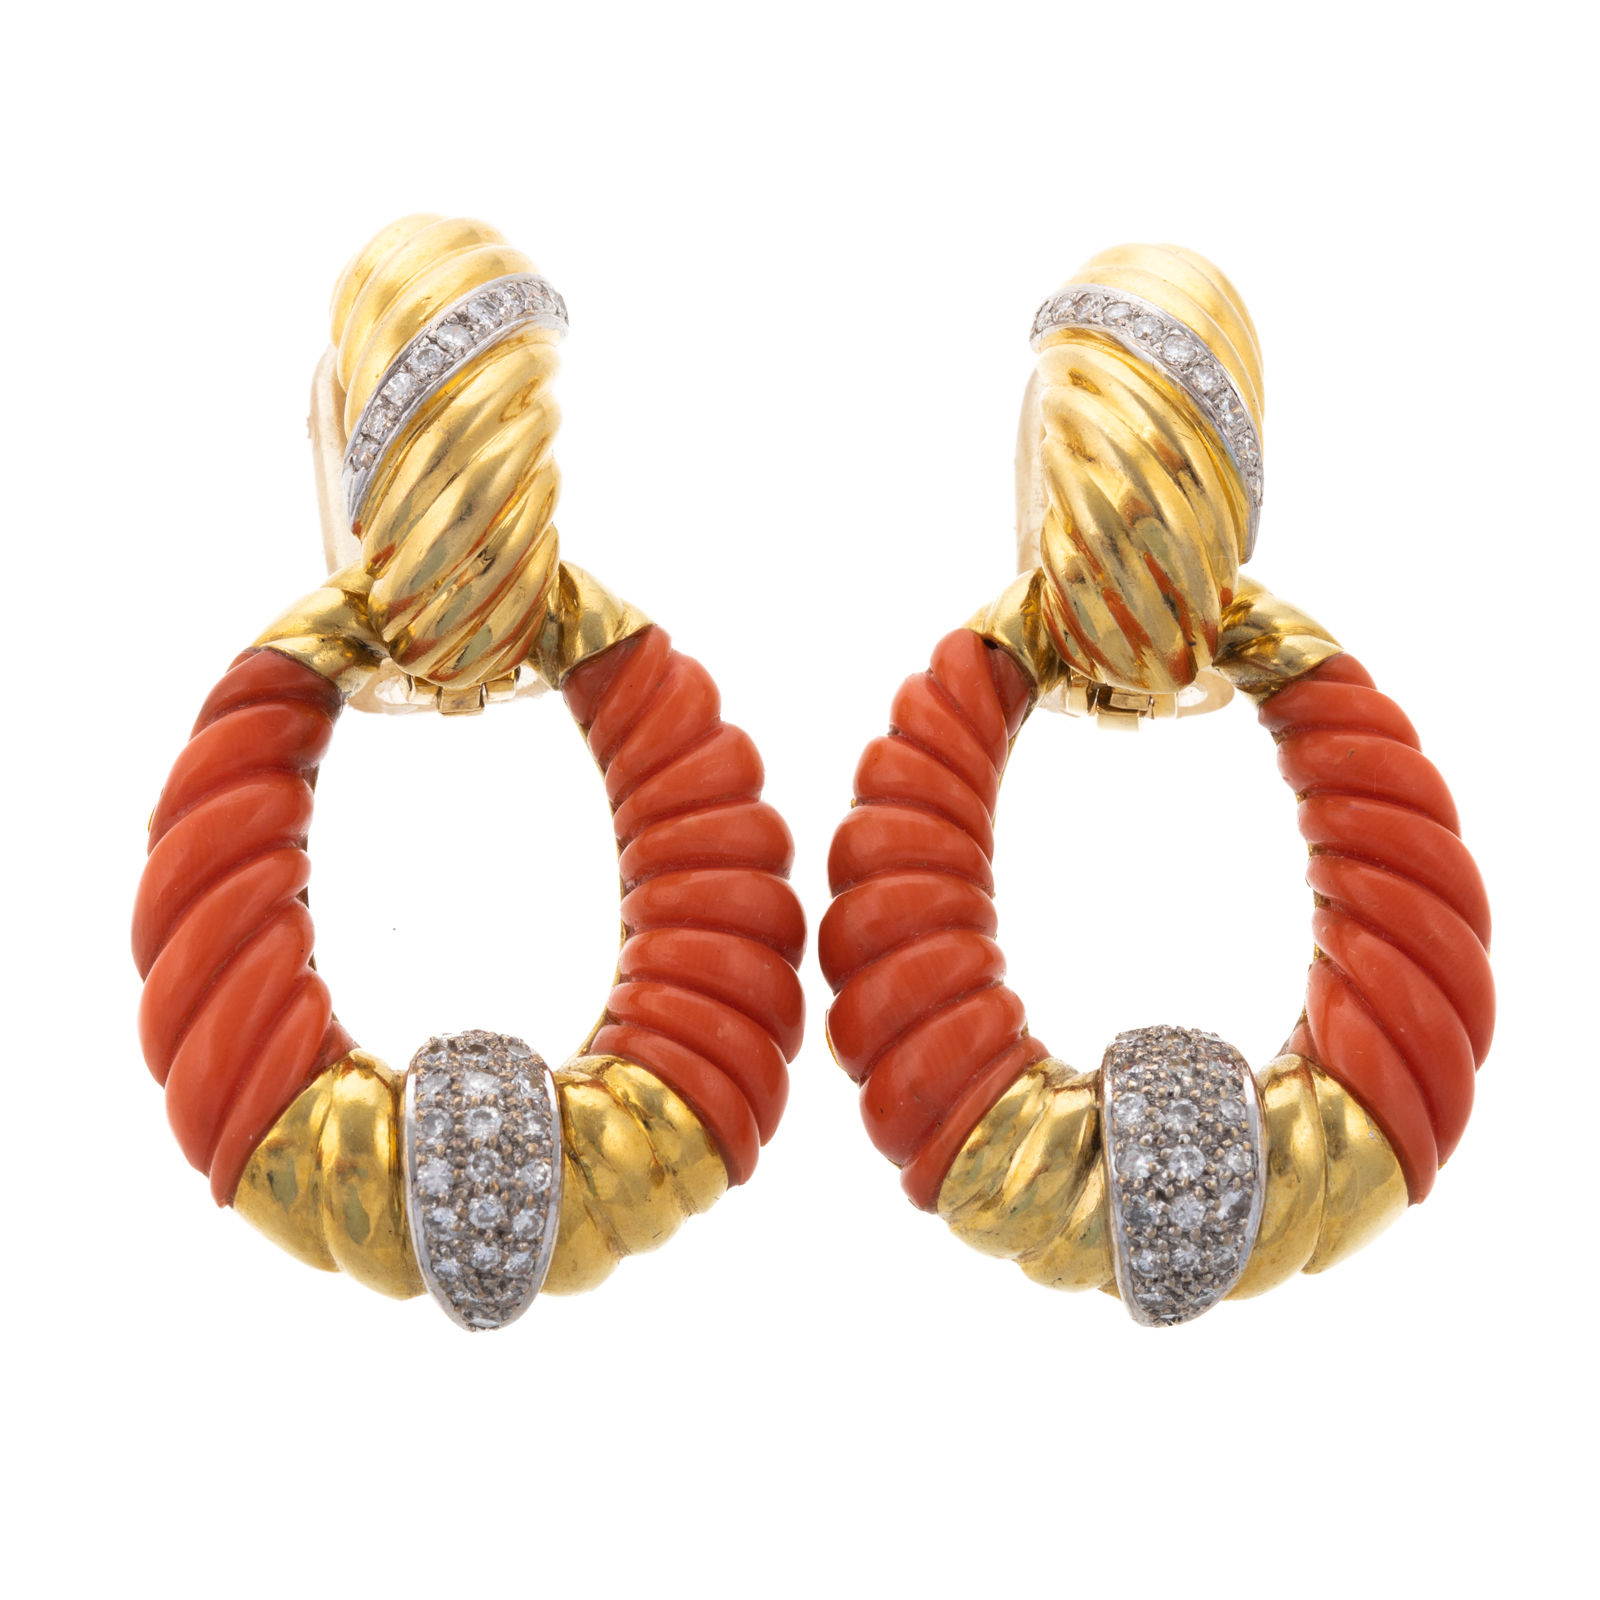 A PAIR OF 18K YELLOW GOLD CARVED 29df2a